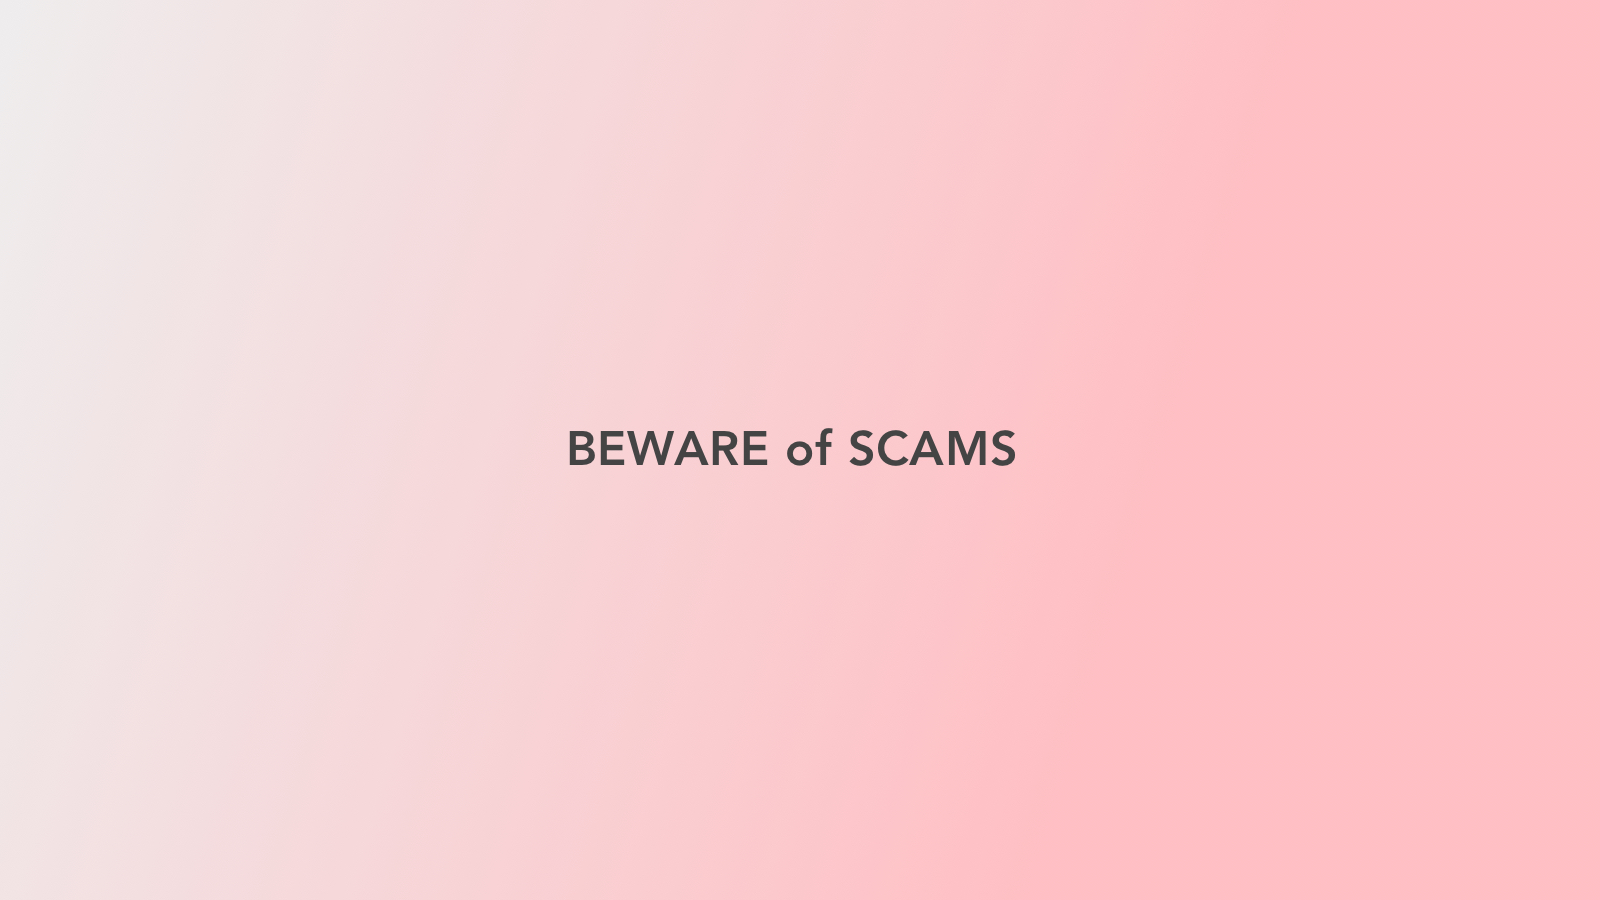 Beware of scams - cover image